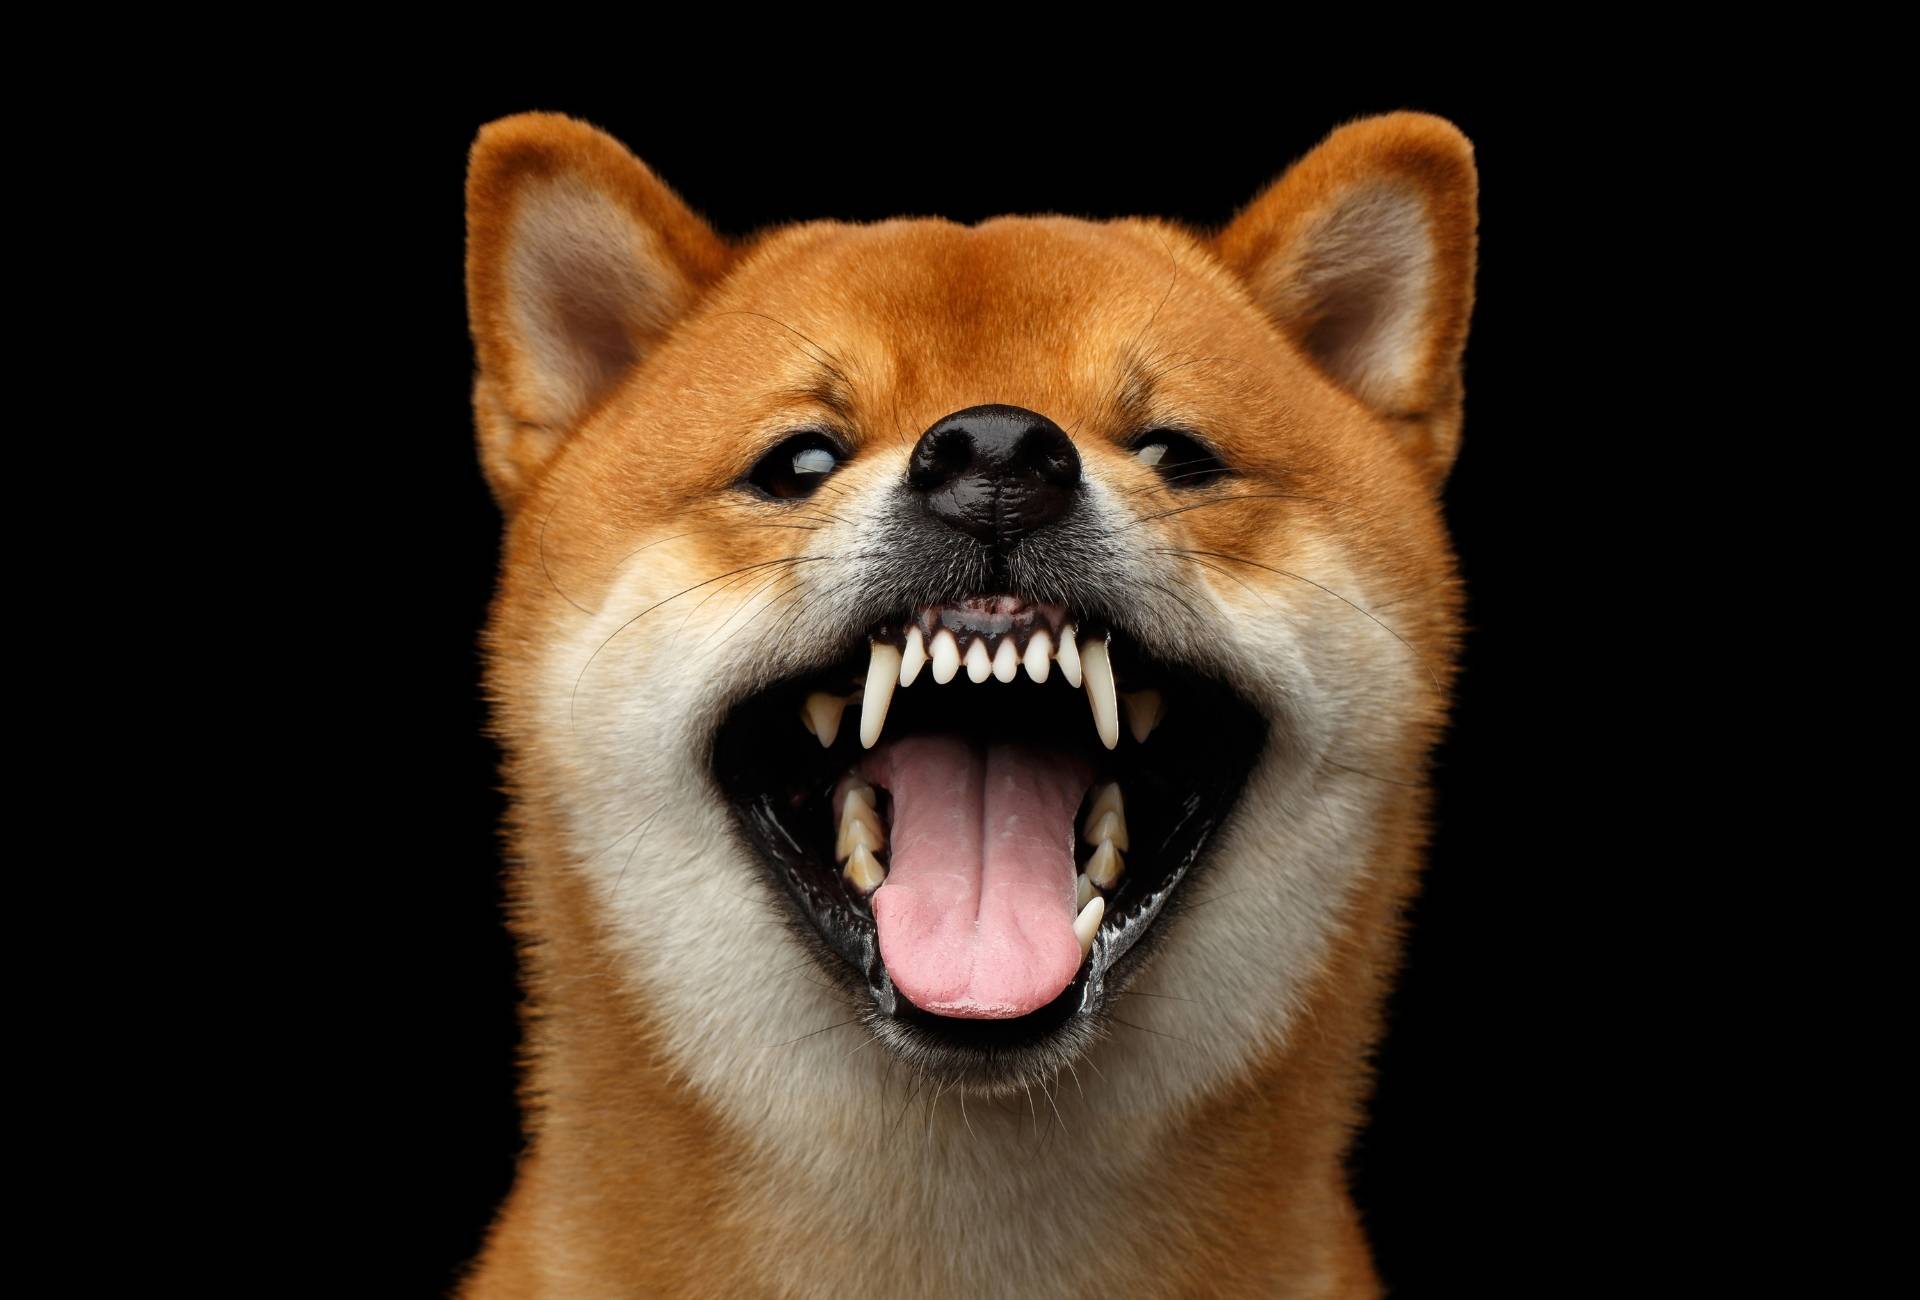 Shiba Inu has the mouth wide open and looks angry in front of a black background.